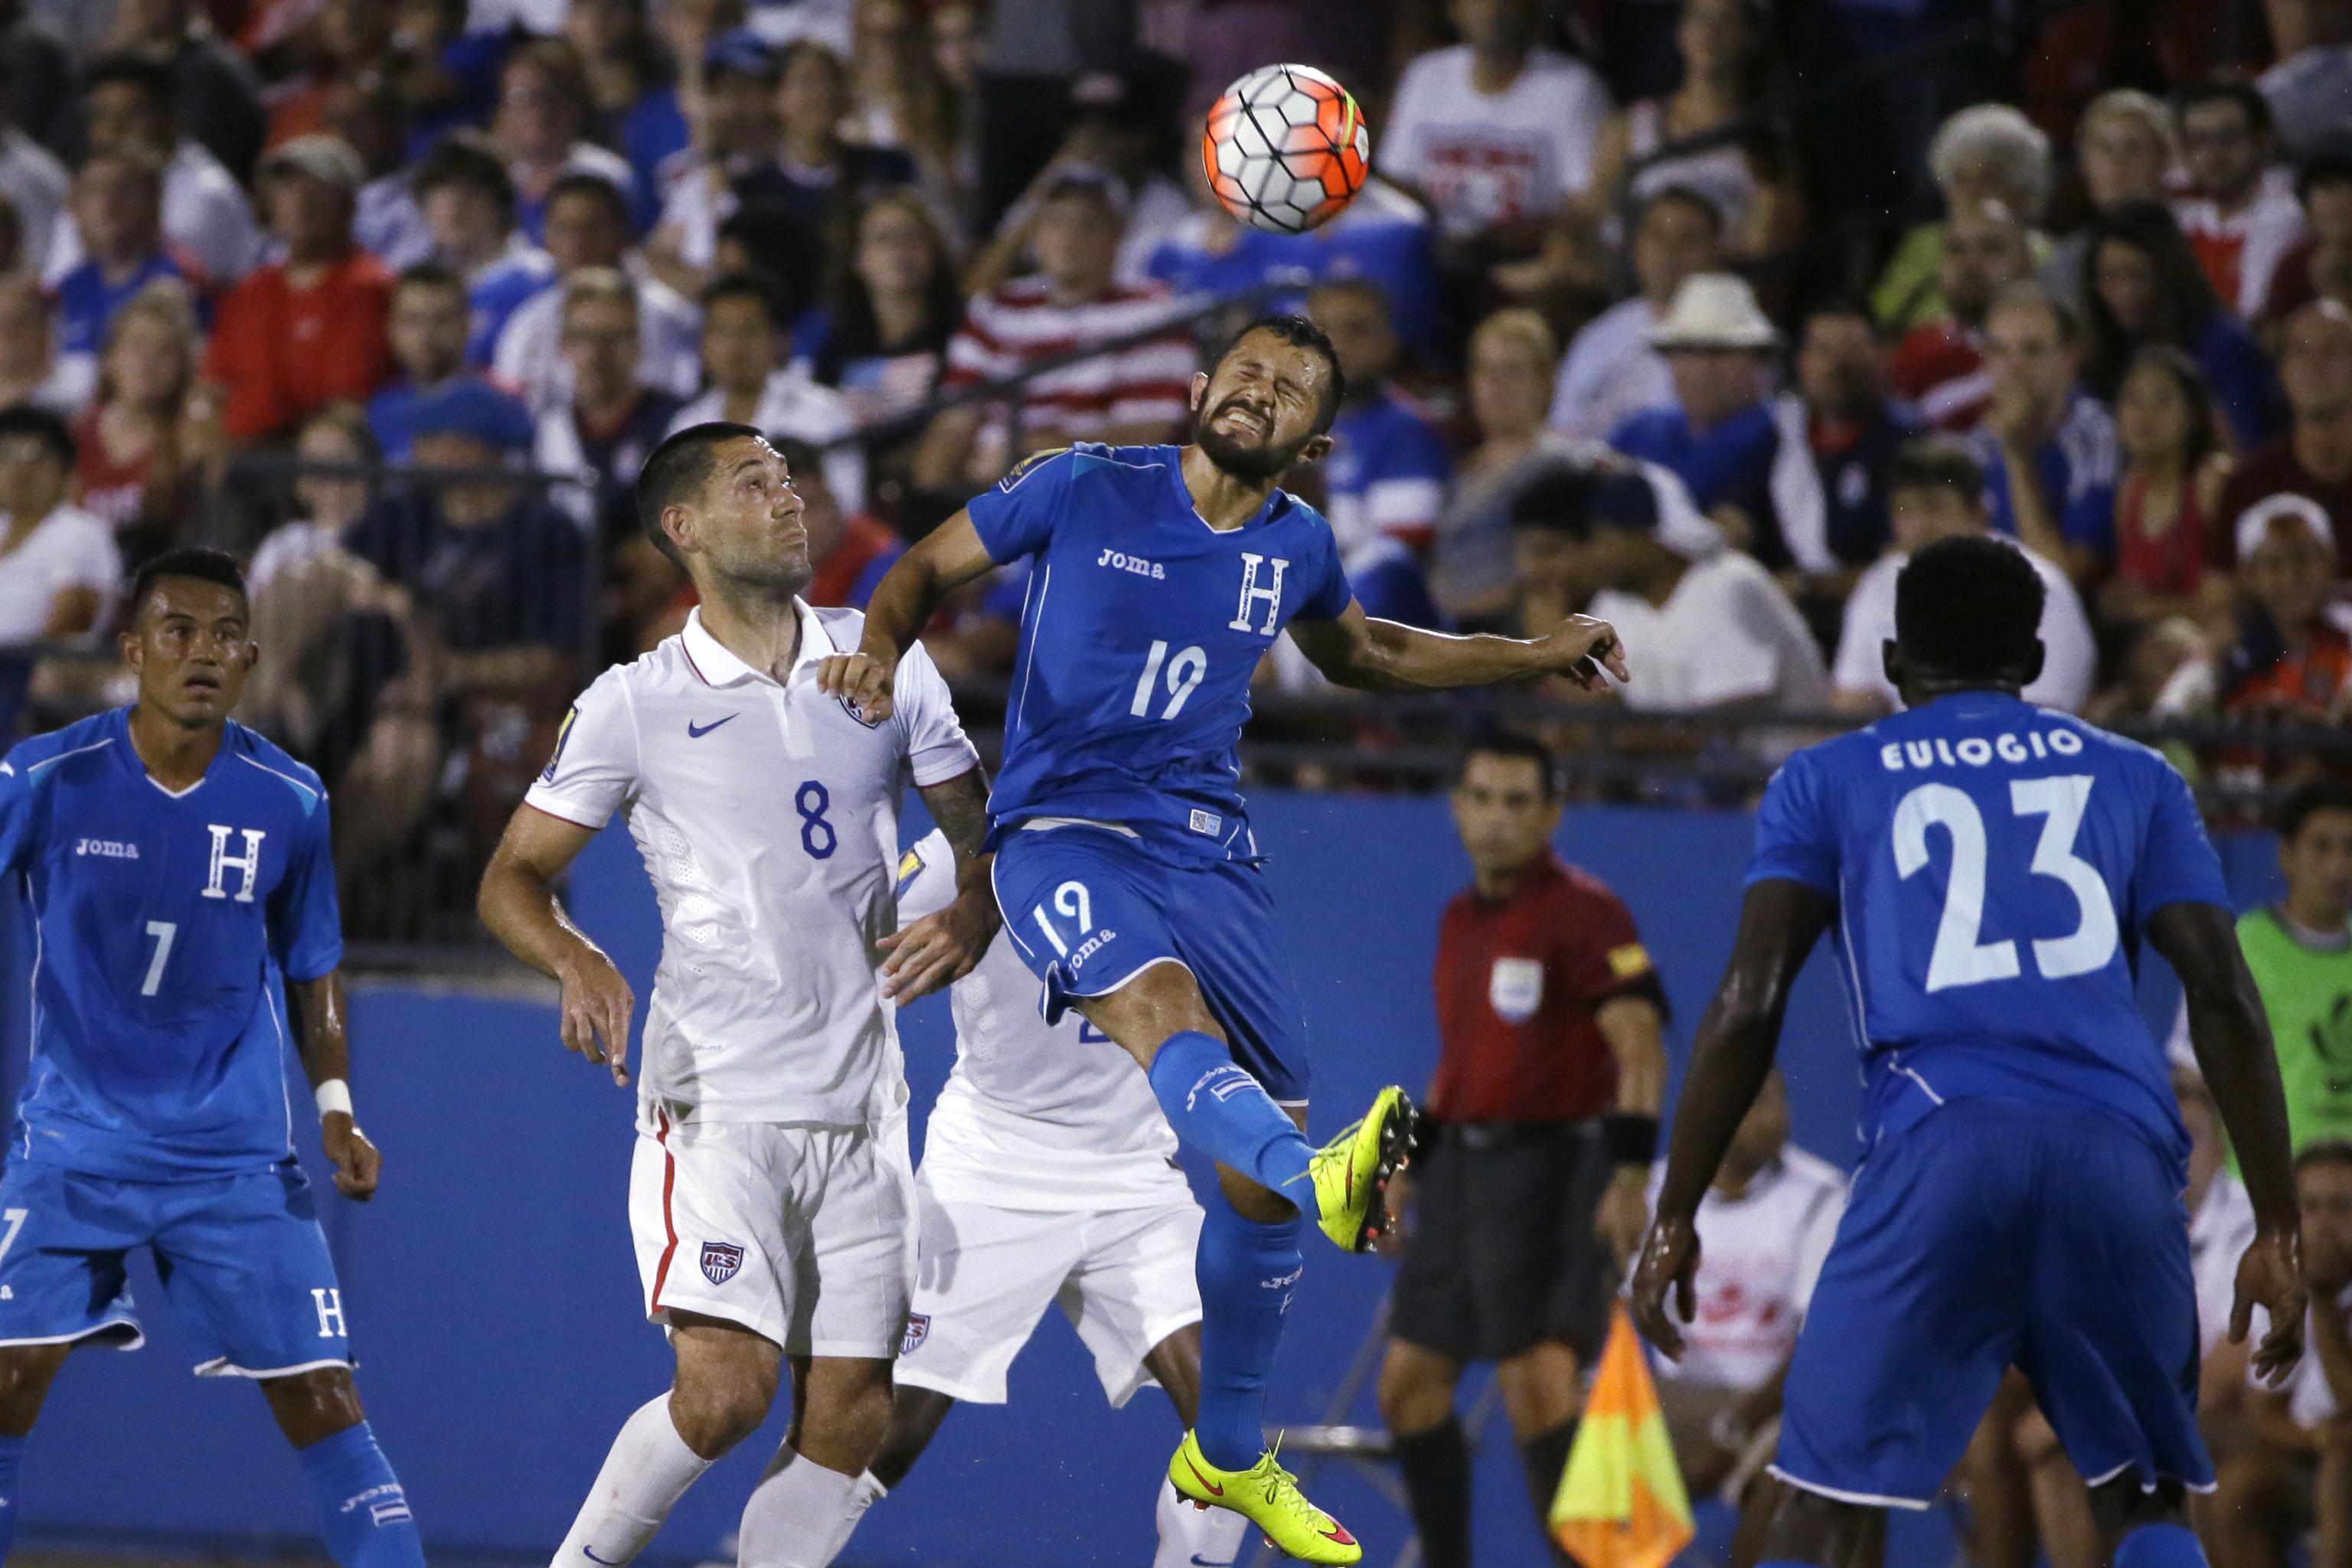 Don't) Use Your Head: Is U.S. Soccer's Youth Restriction The Right